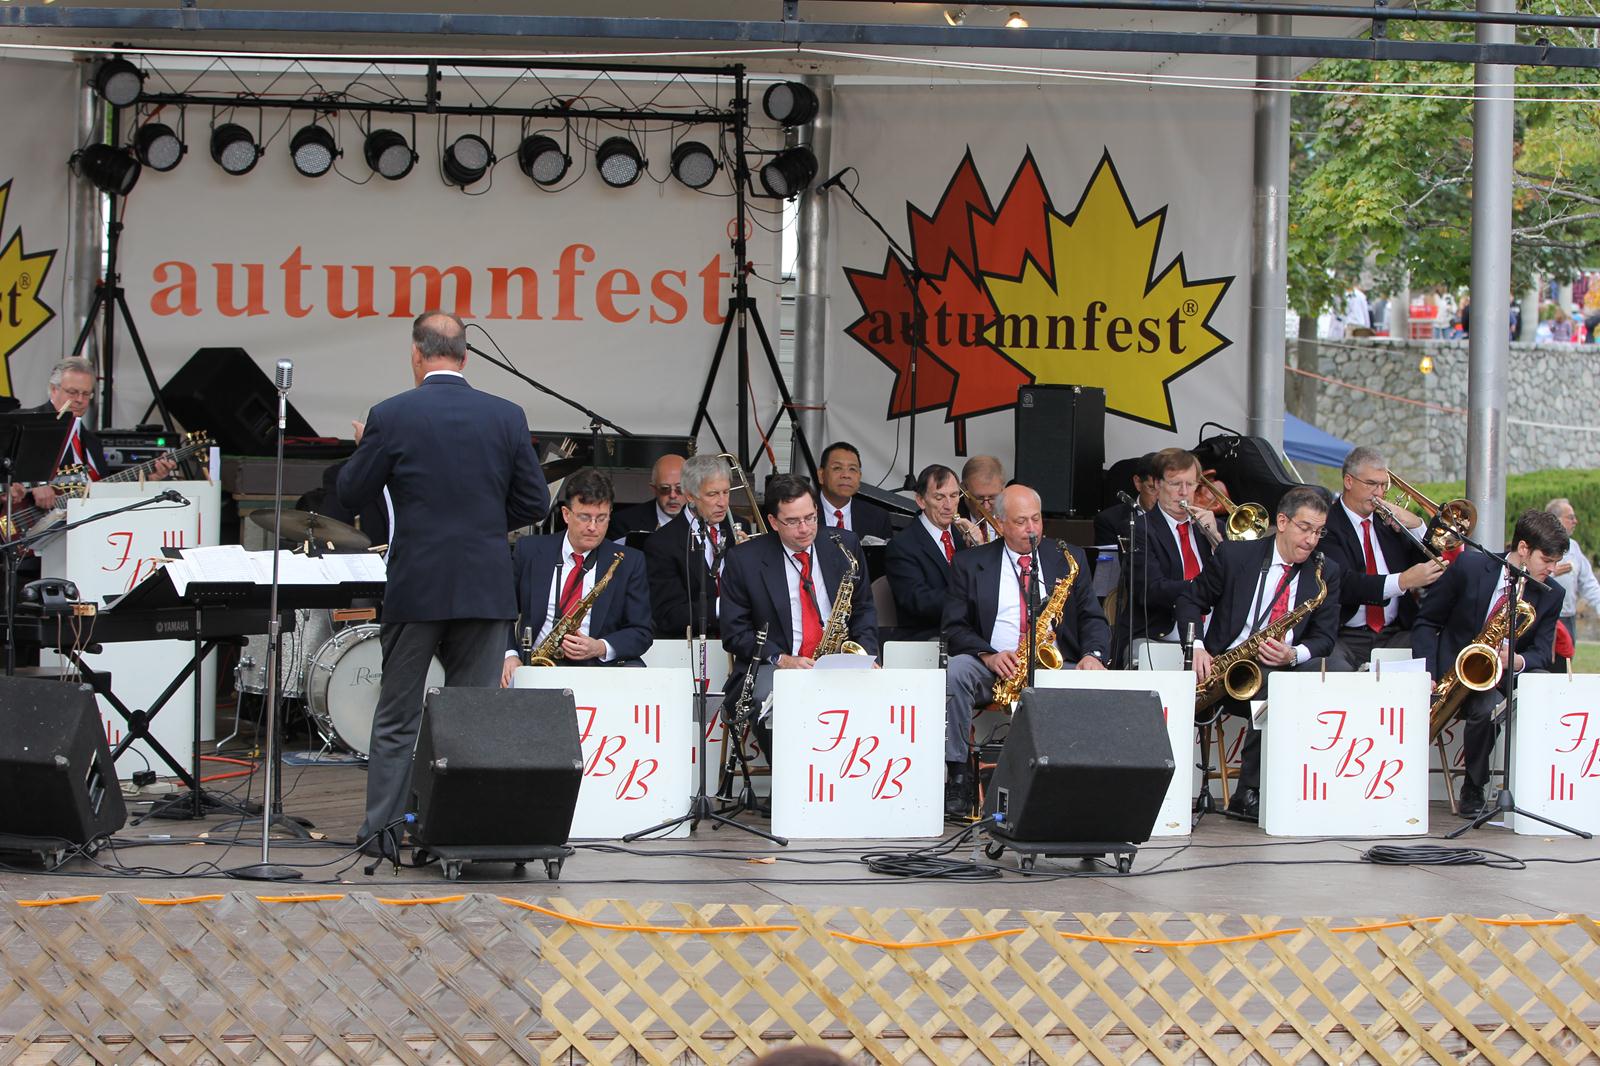 The Fantasy Big Band On Stage at Autumnfest in Woonsocket, RI